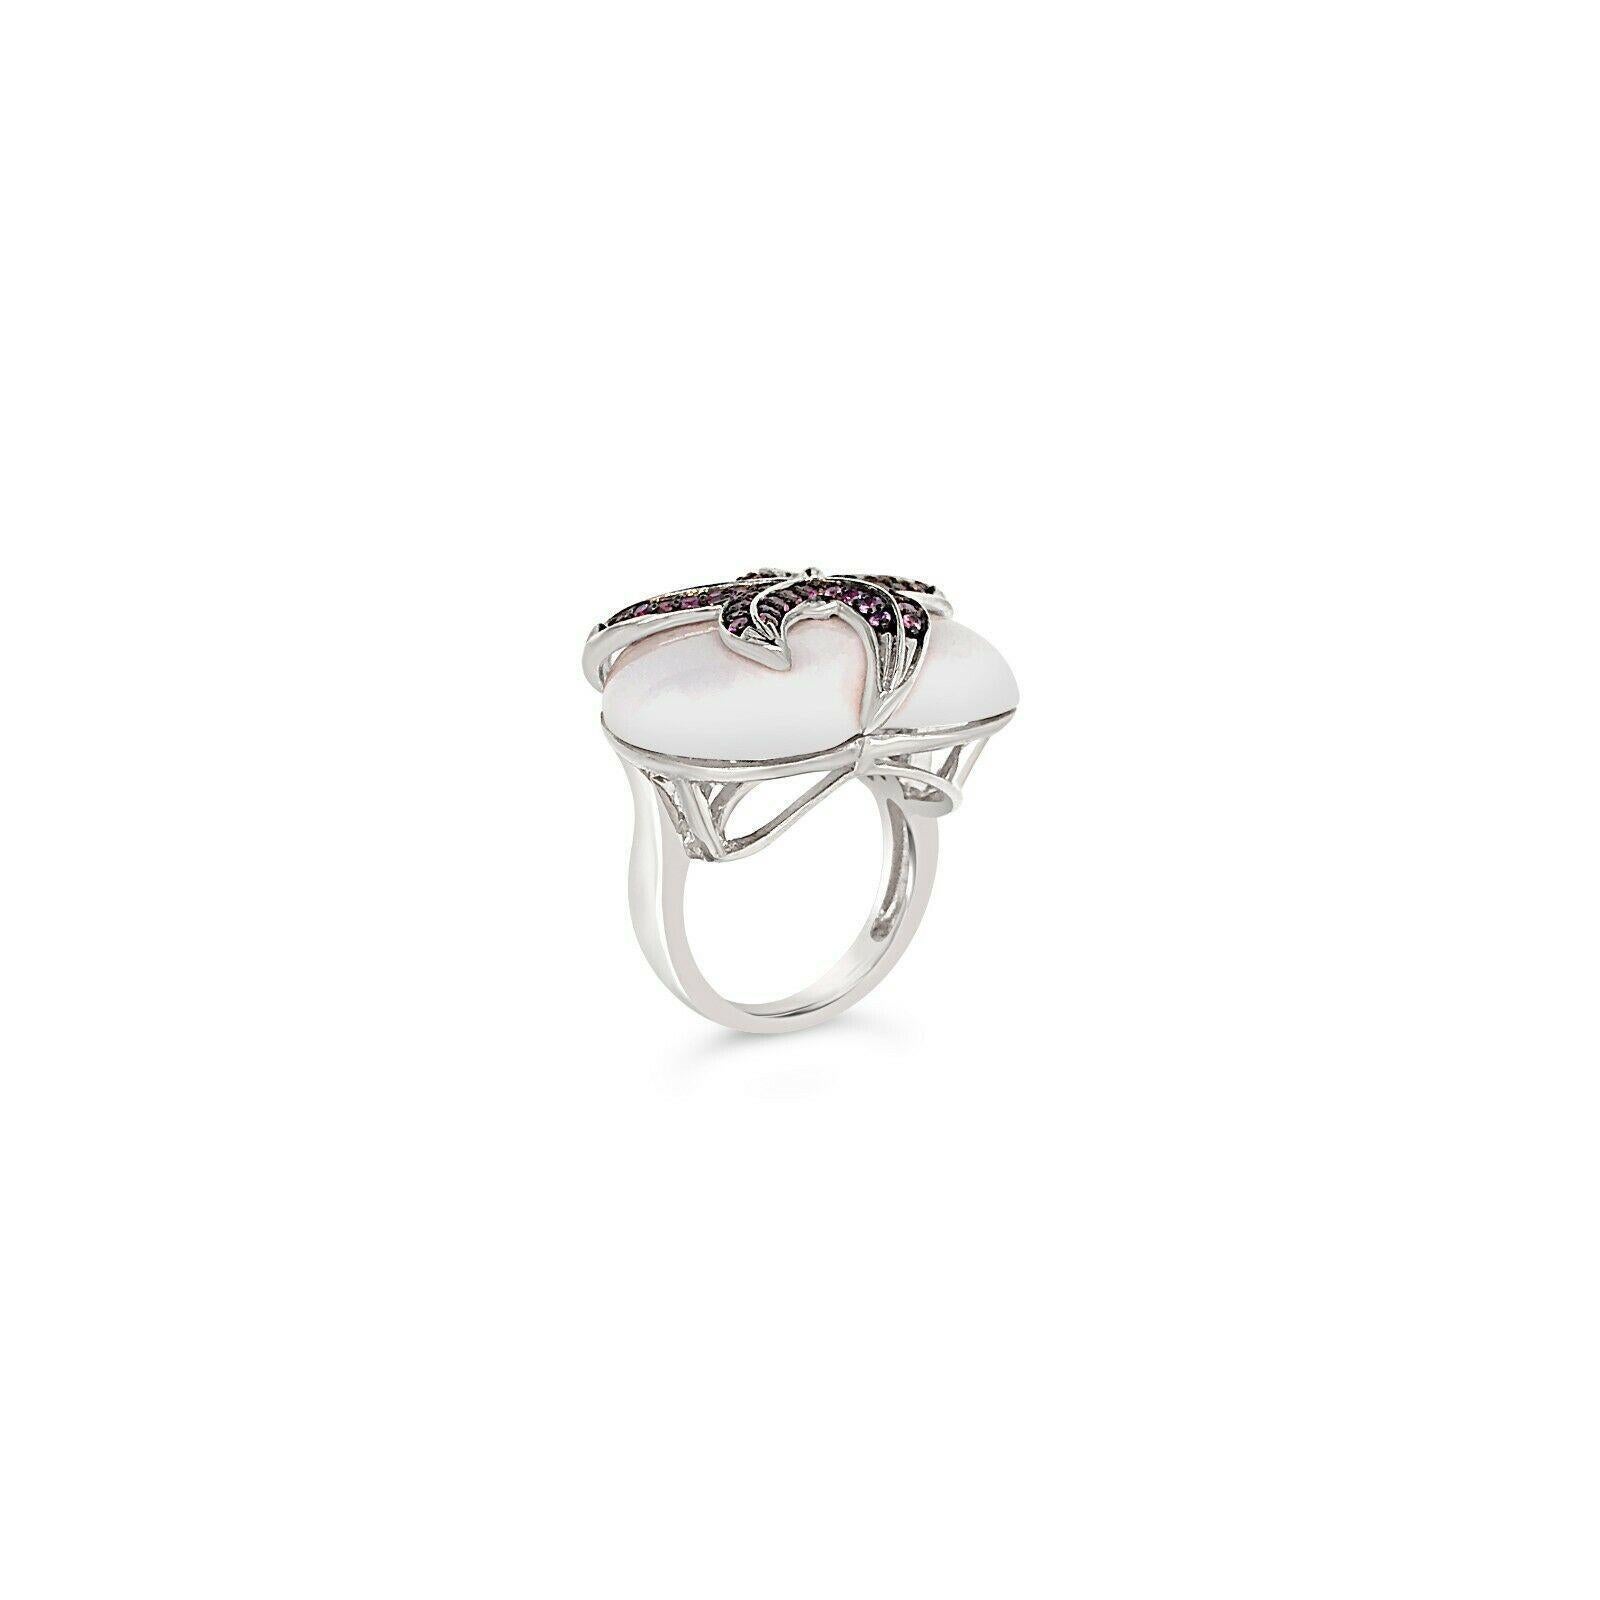 Carlo Viani 925 Sterling Silver Pink Sapphire Gemstone Love Heart Cocktail Ring In New Condition For Sale In Great Neck, NY